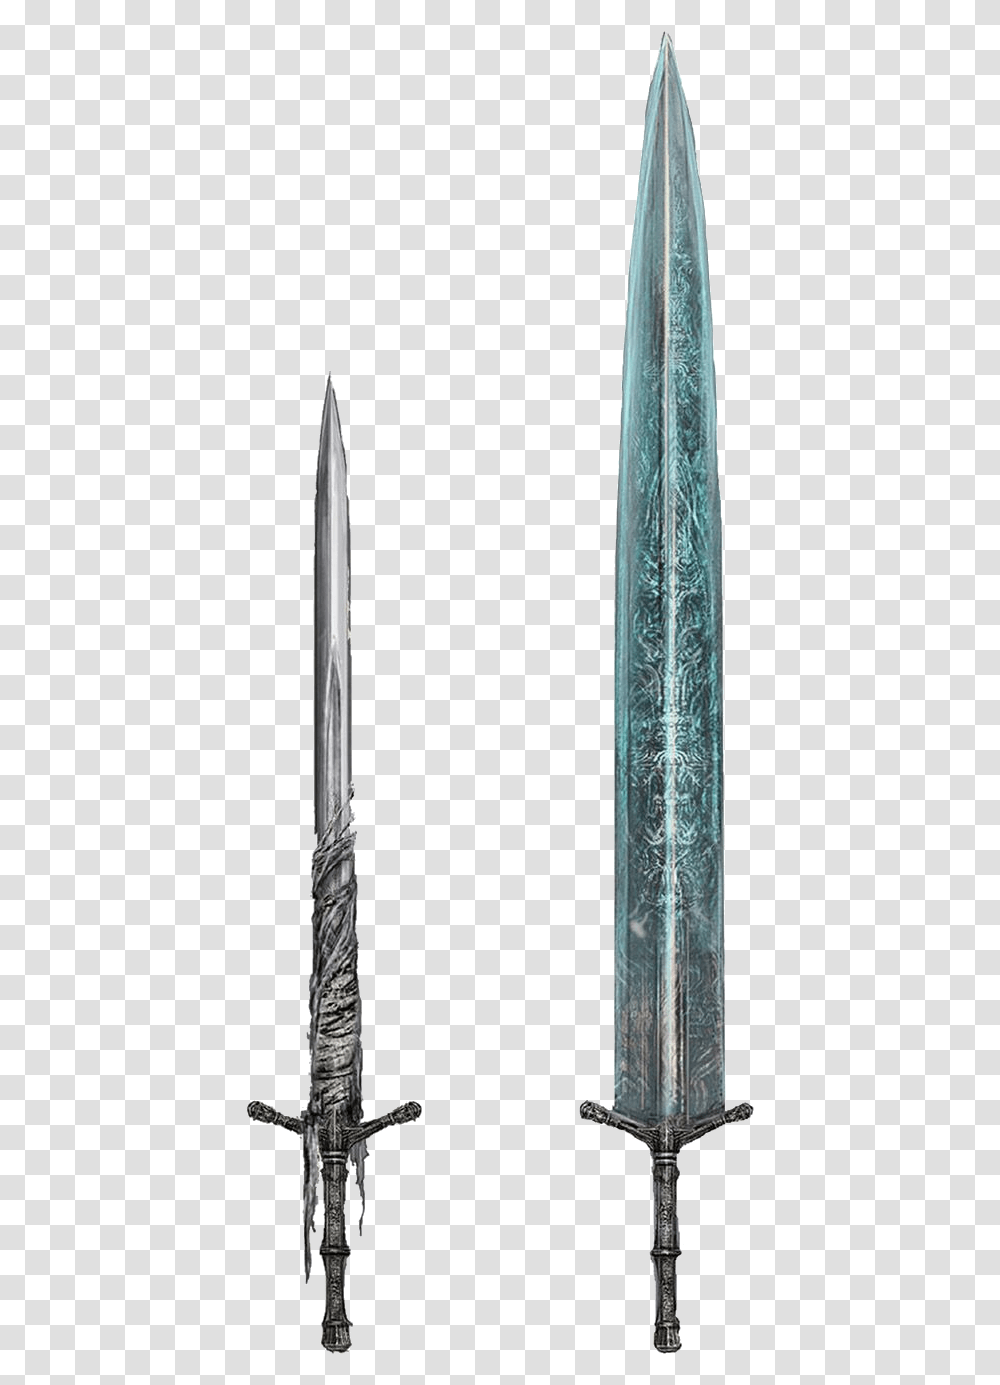 Art From Bloodborne Greatsword Dnd Moonlight Greatsword Background, Architecture, Building, Weapon, Weaponry Transparent Png